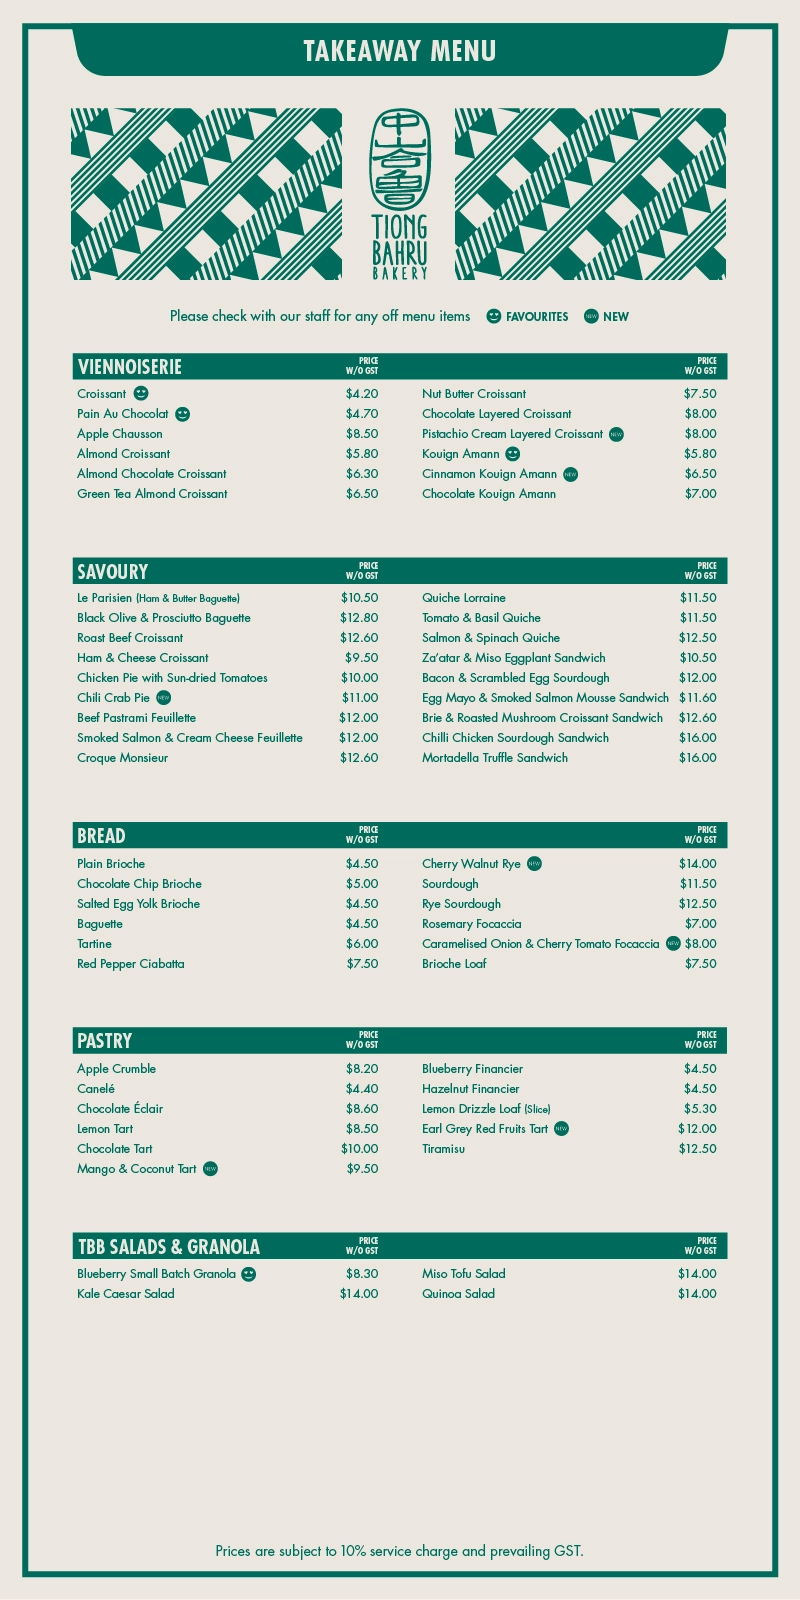 TIONG BAHRU BAKERY BREAD MENU PRICES 2024